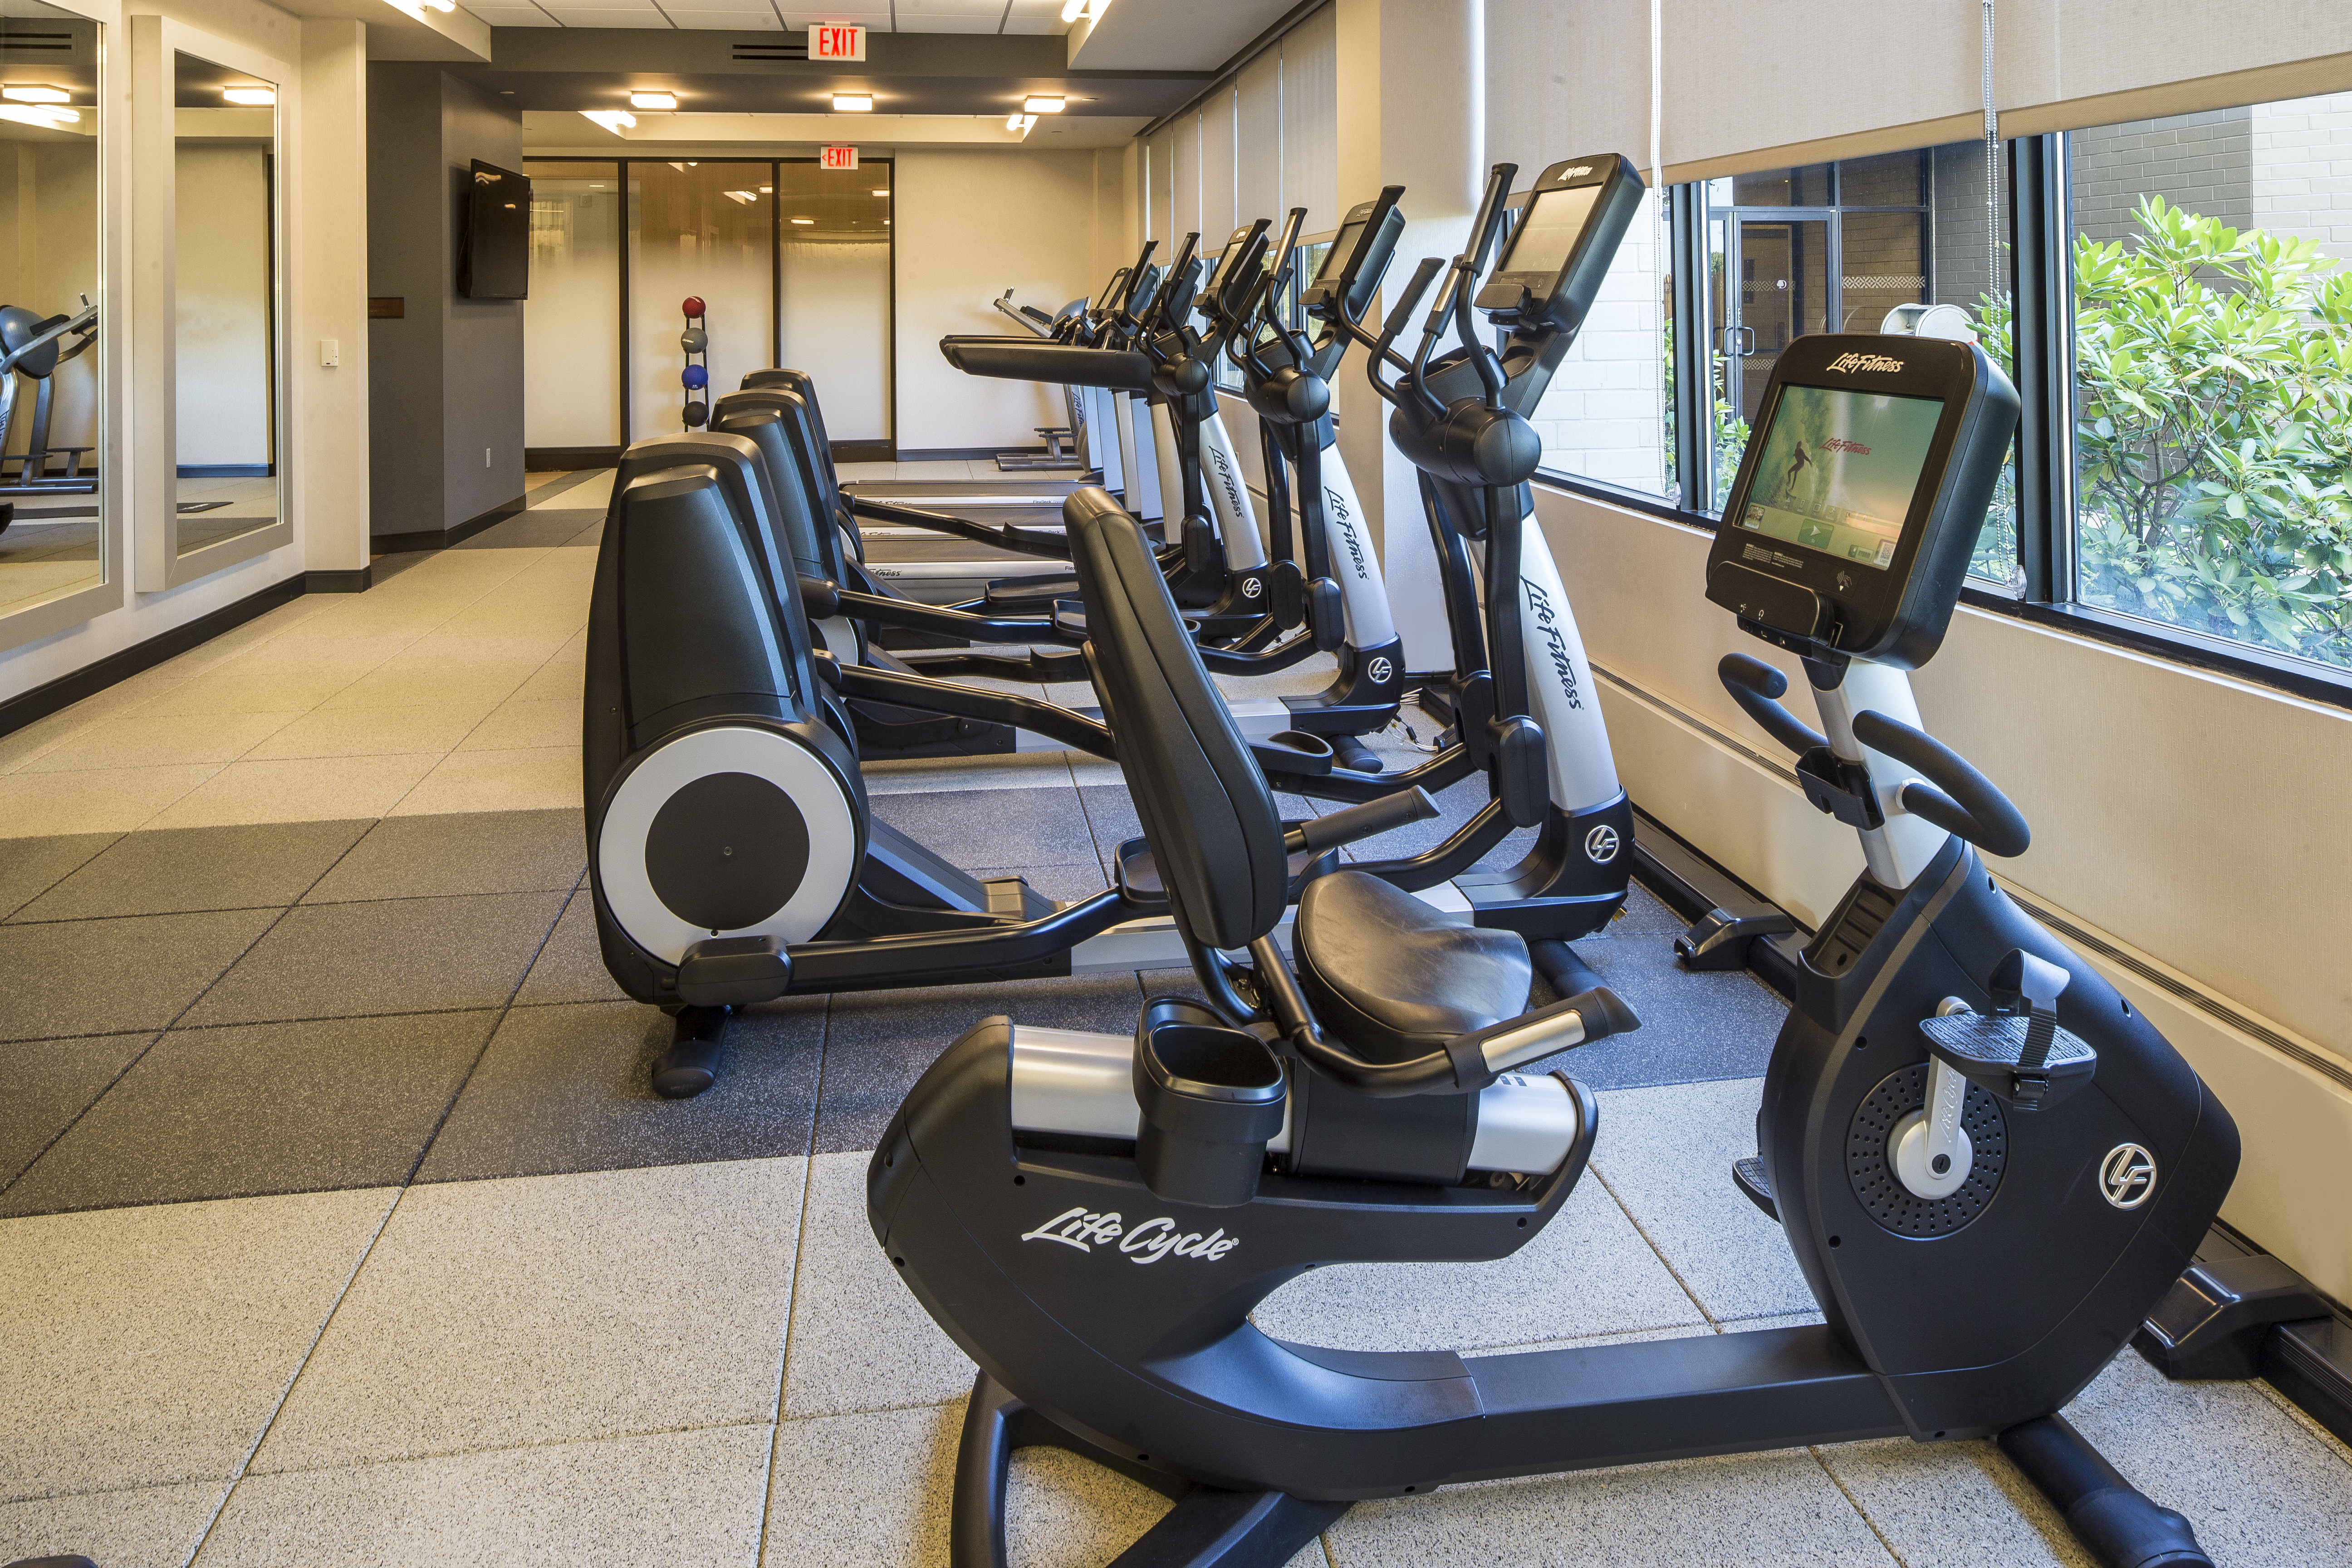 Fitness Room With Large Wall Mirrors, TV, Weight Balls, and Cardio Equipment Facing Windows With Outside View